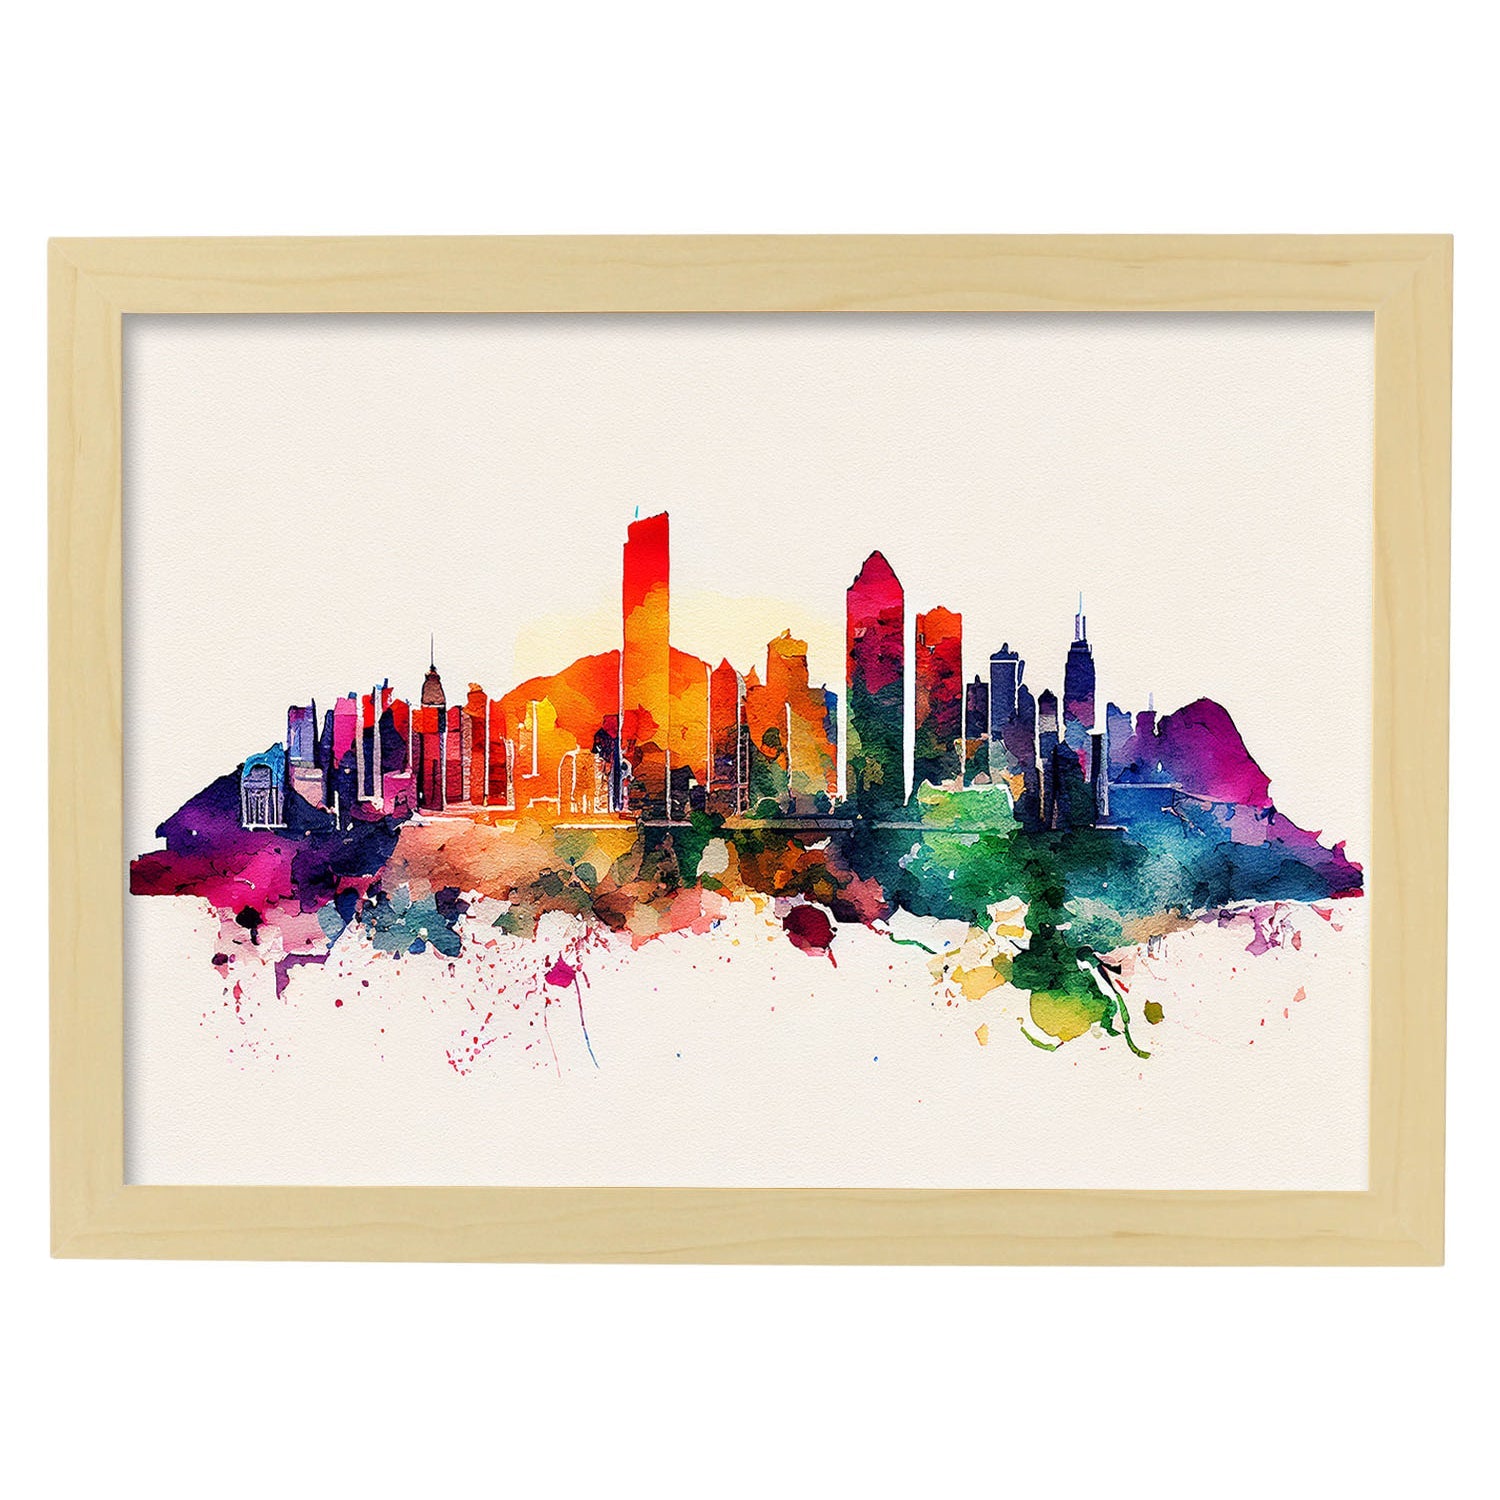 Nacnic watercolor of a skyline of the city of Hong Kong_2. Aesthetic Wall Art Prints for Bedroom or Living Room Design.-Artwork-Nacnic-A4-Marco Madera Clara-Nacnic Estudio SL